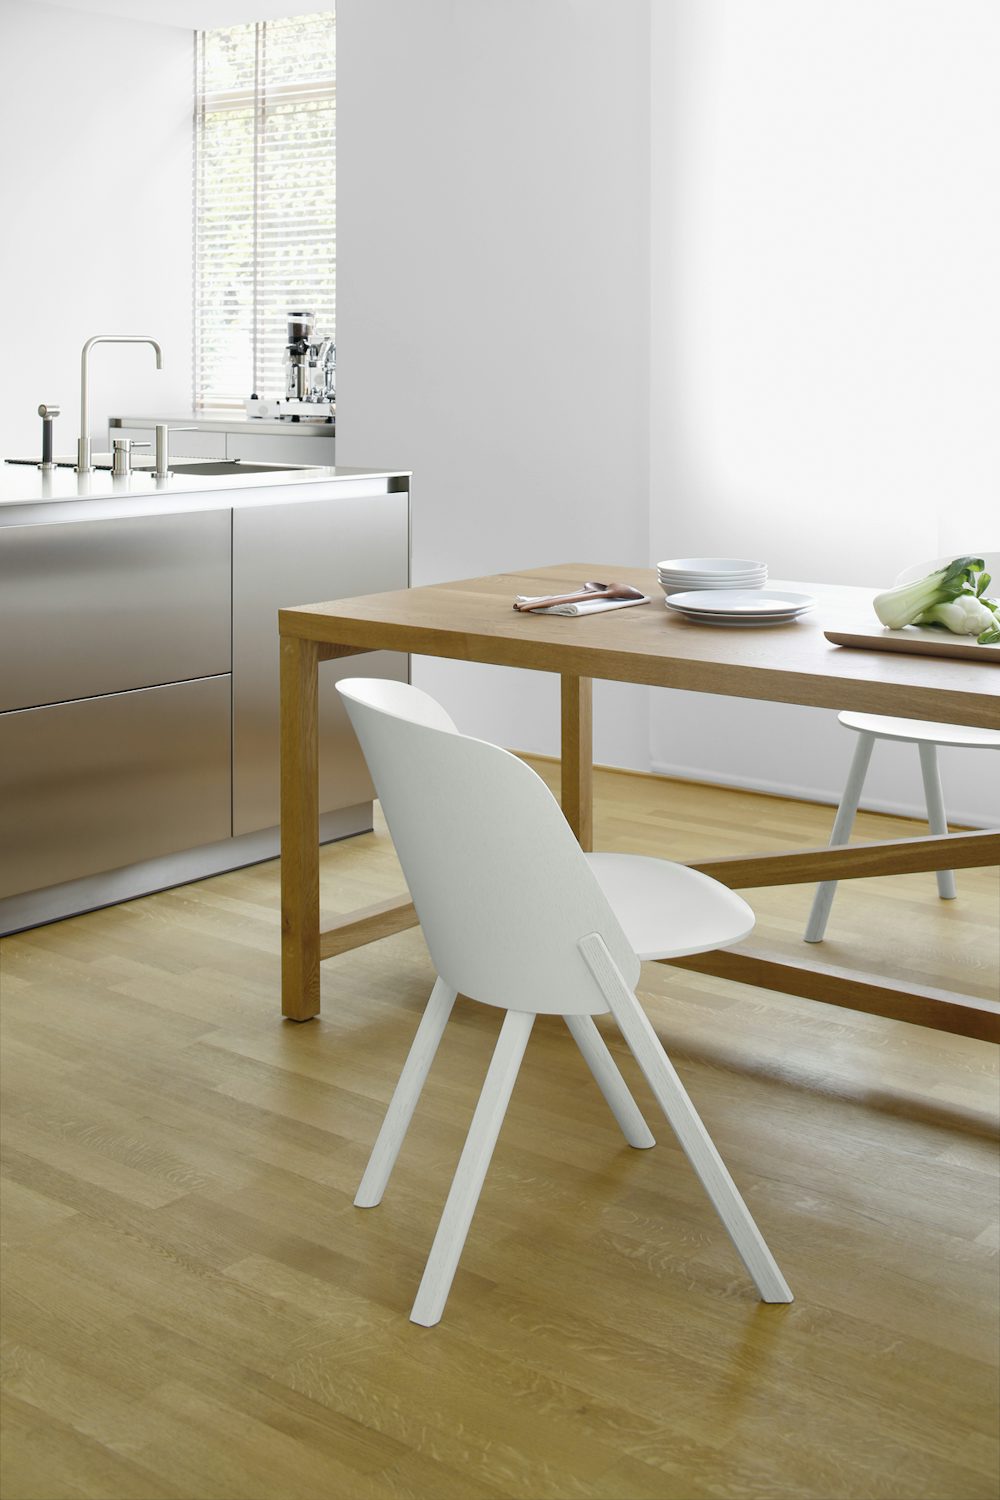 e15 platz table in kitchen in oiled oak with this side chair in whtie